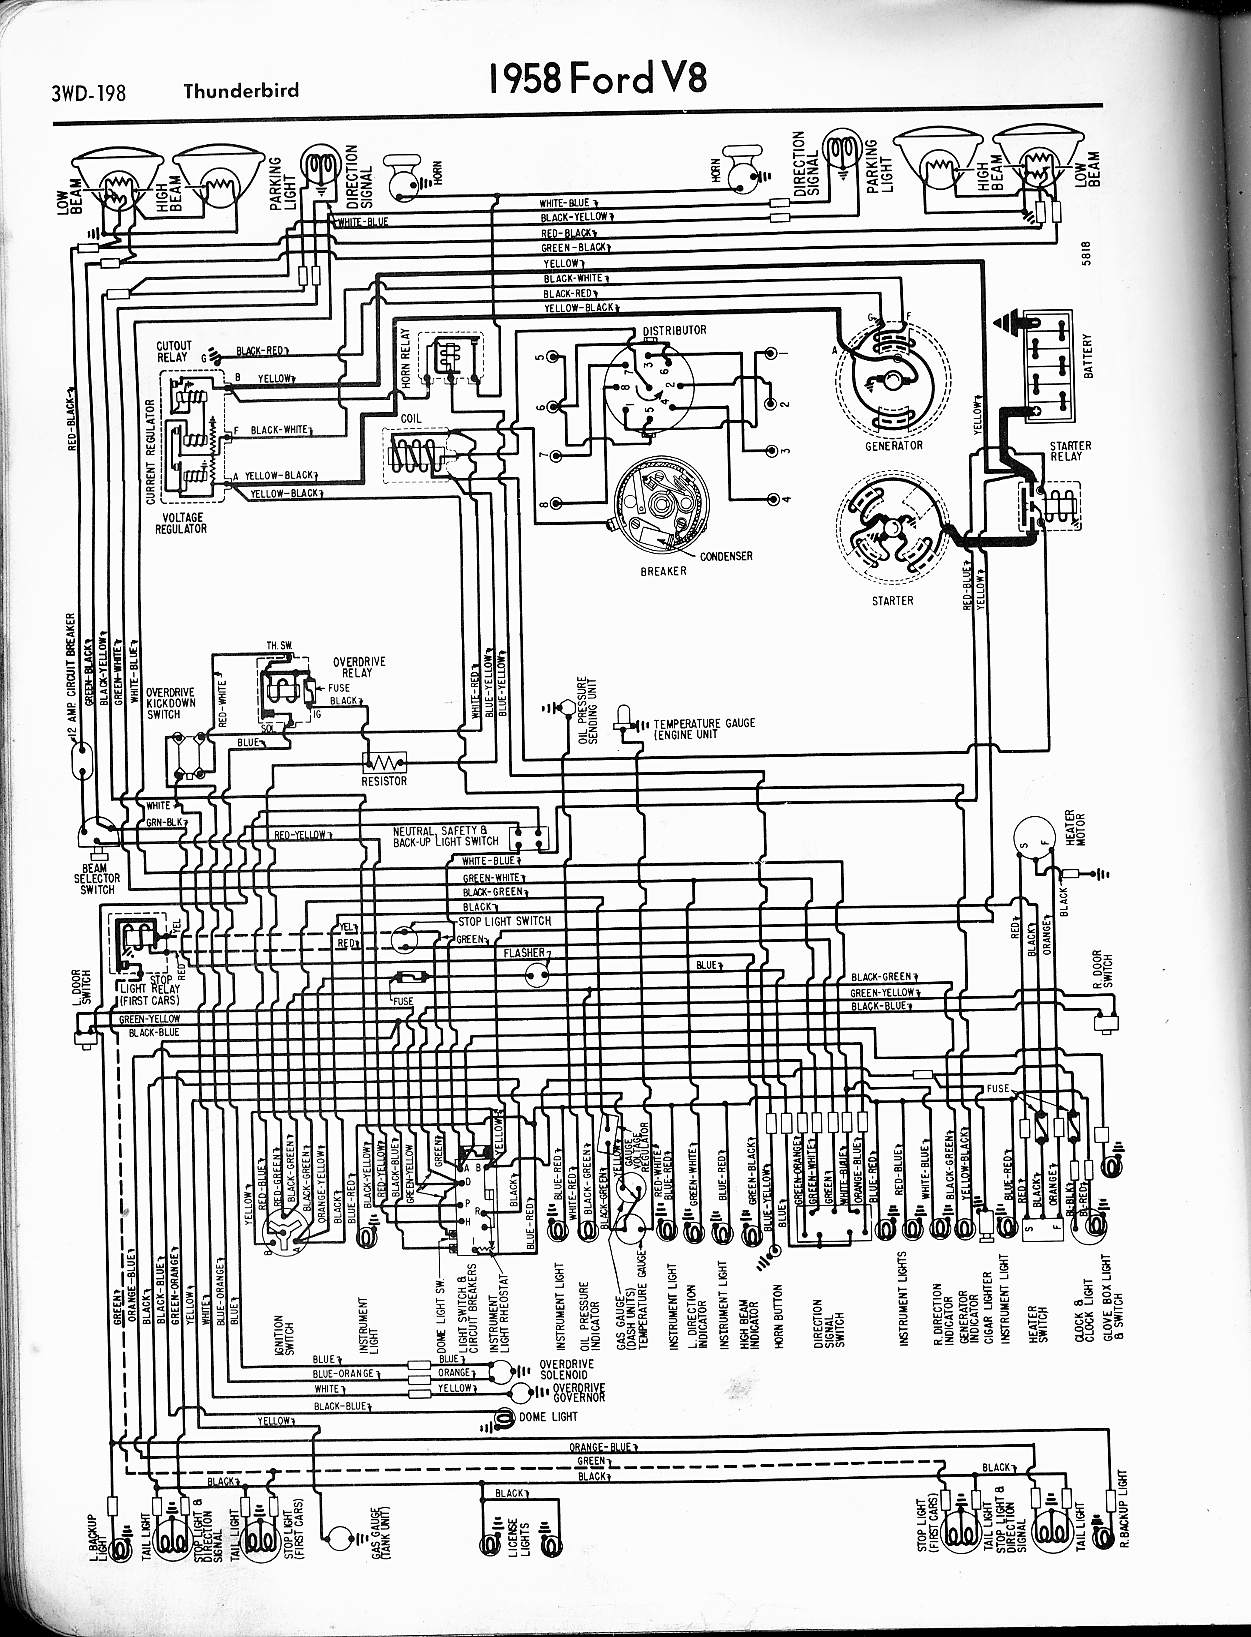 1960 Chevy Chevrolet 4 Wire Voltage Regulator Wiring Diagram from www.oocities.org